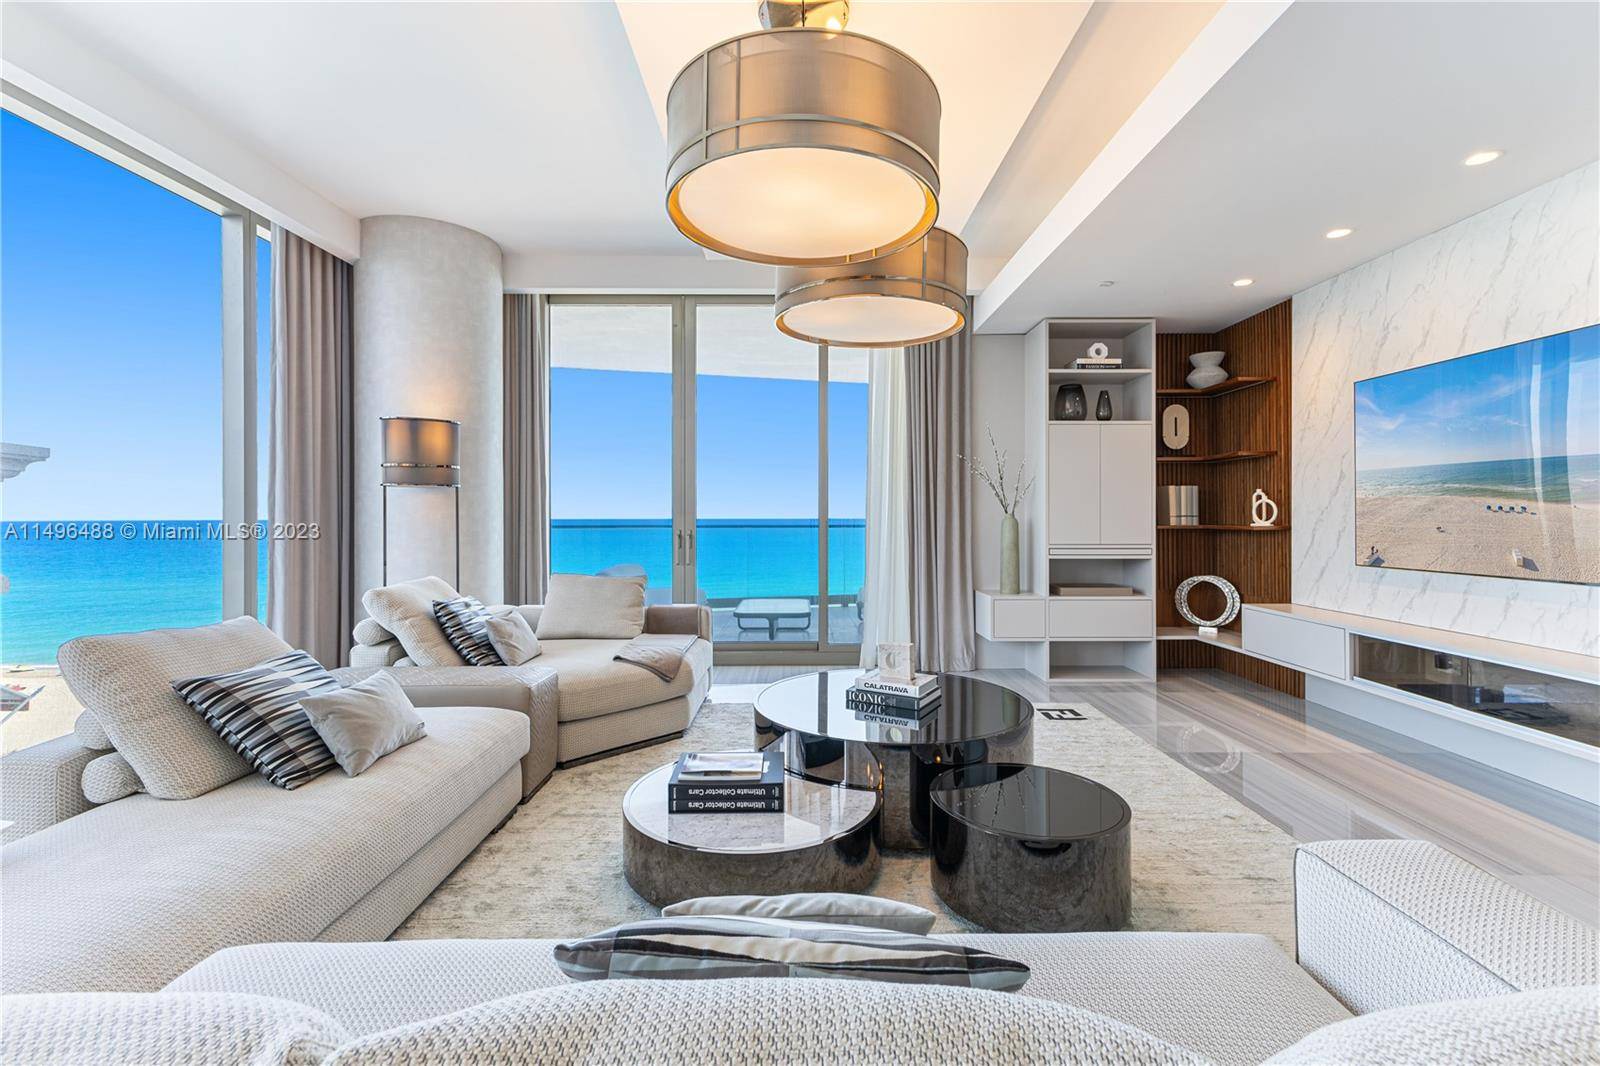 Magnificent oceanfront residence, beautifully designed and furnished by Luxury Living.